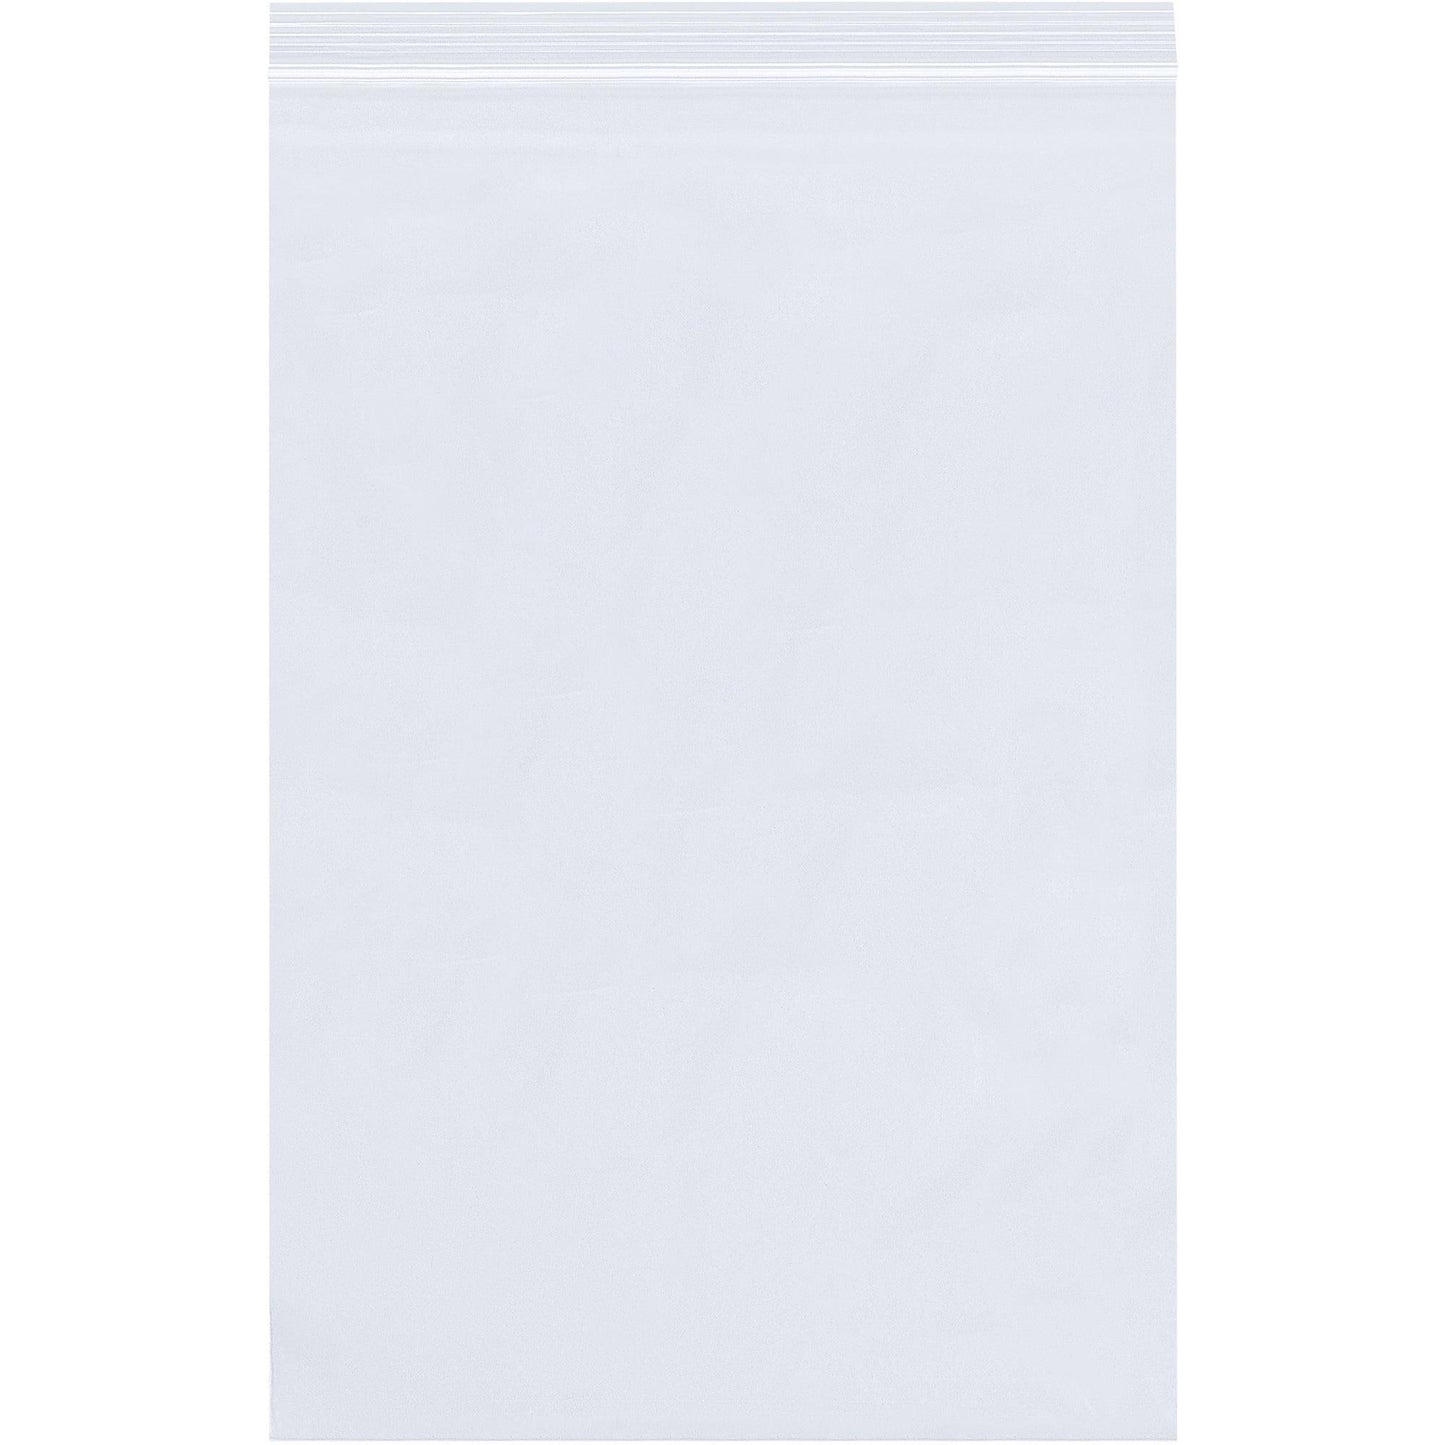 16 x 24" - 4 Mil Reclosable Poly Bags - PB3825